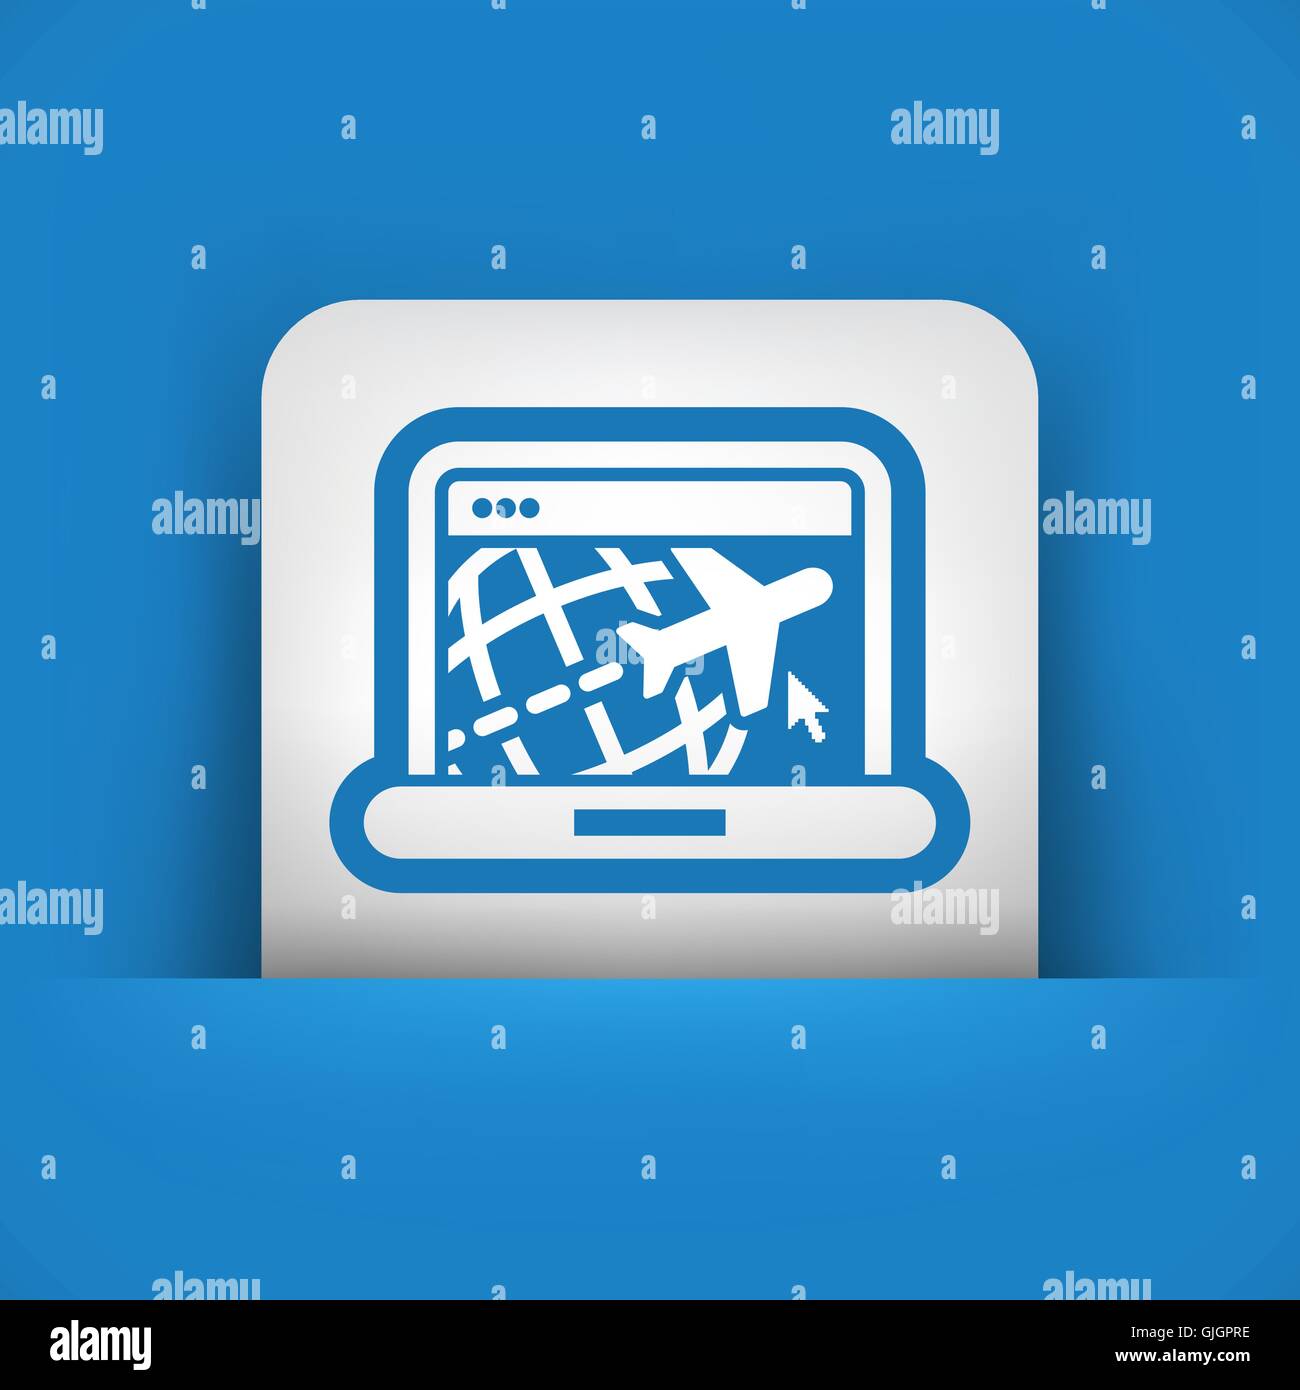 Illustration of travel web agency icon Stock Vector